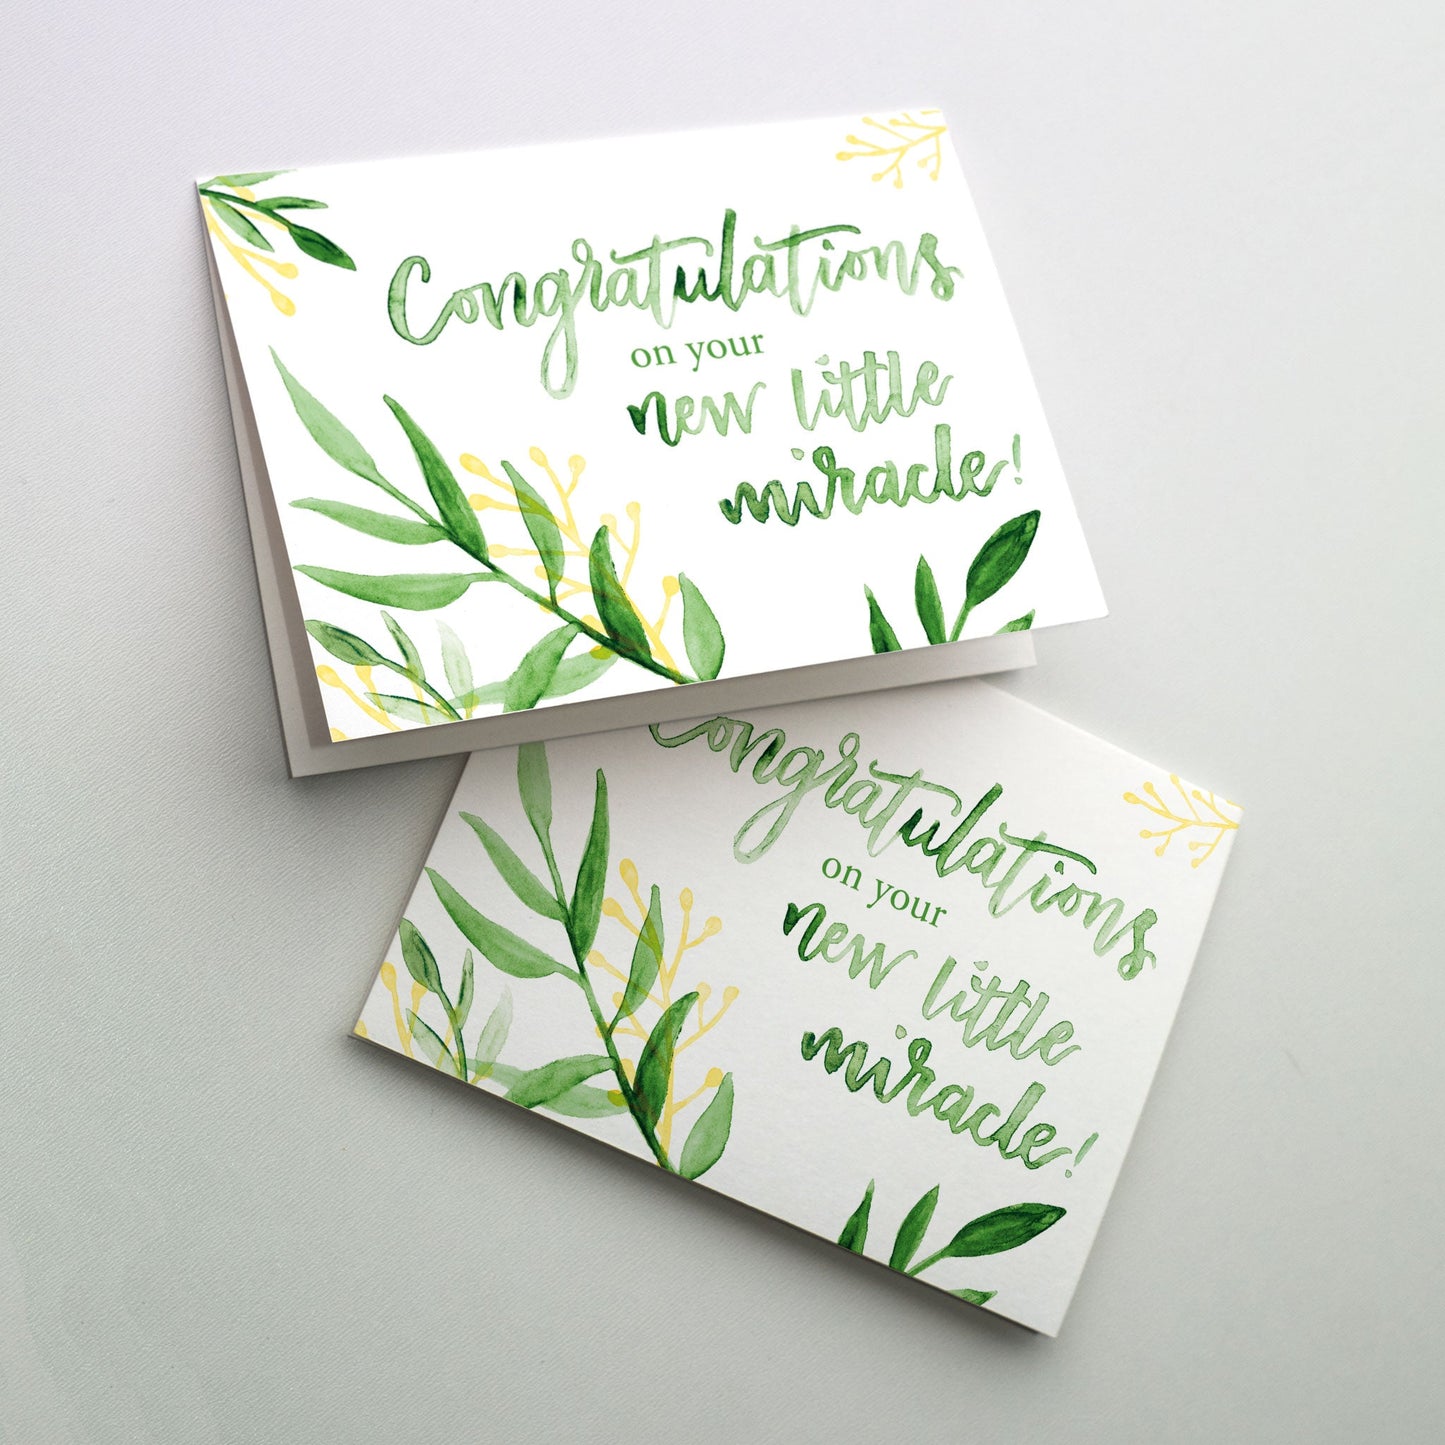 Calligraphy set amidst growing greenery. This card is suitable for birth after a difficult pregnancy or when a couple had difficulty conceiving.